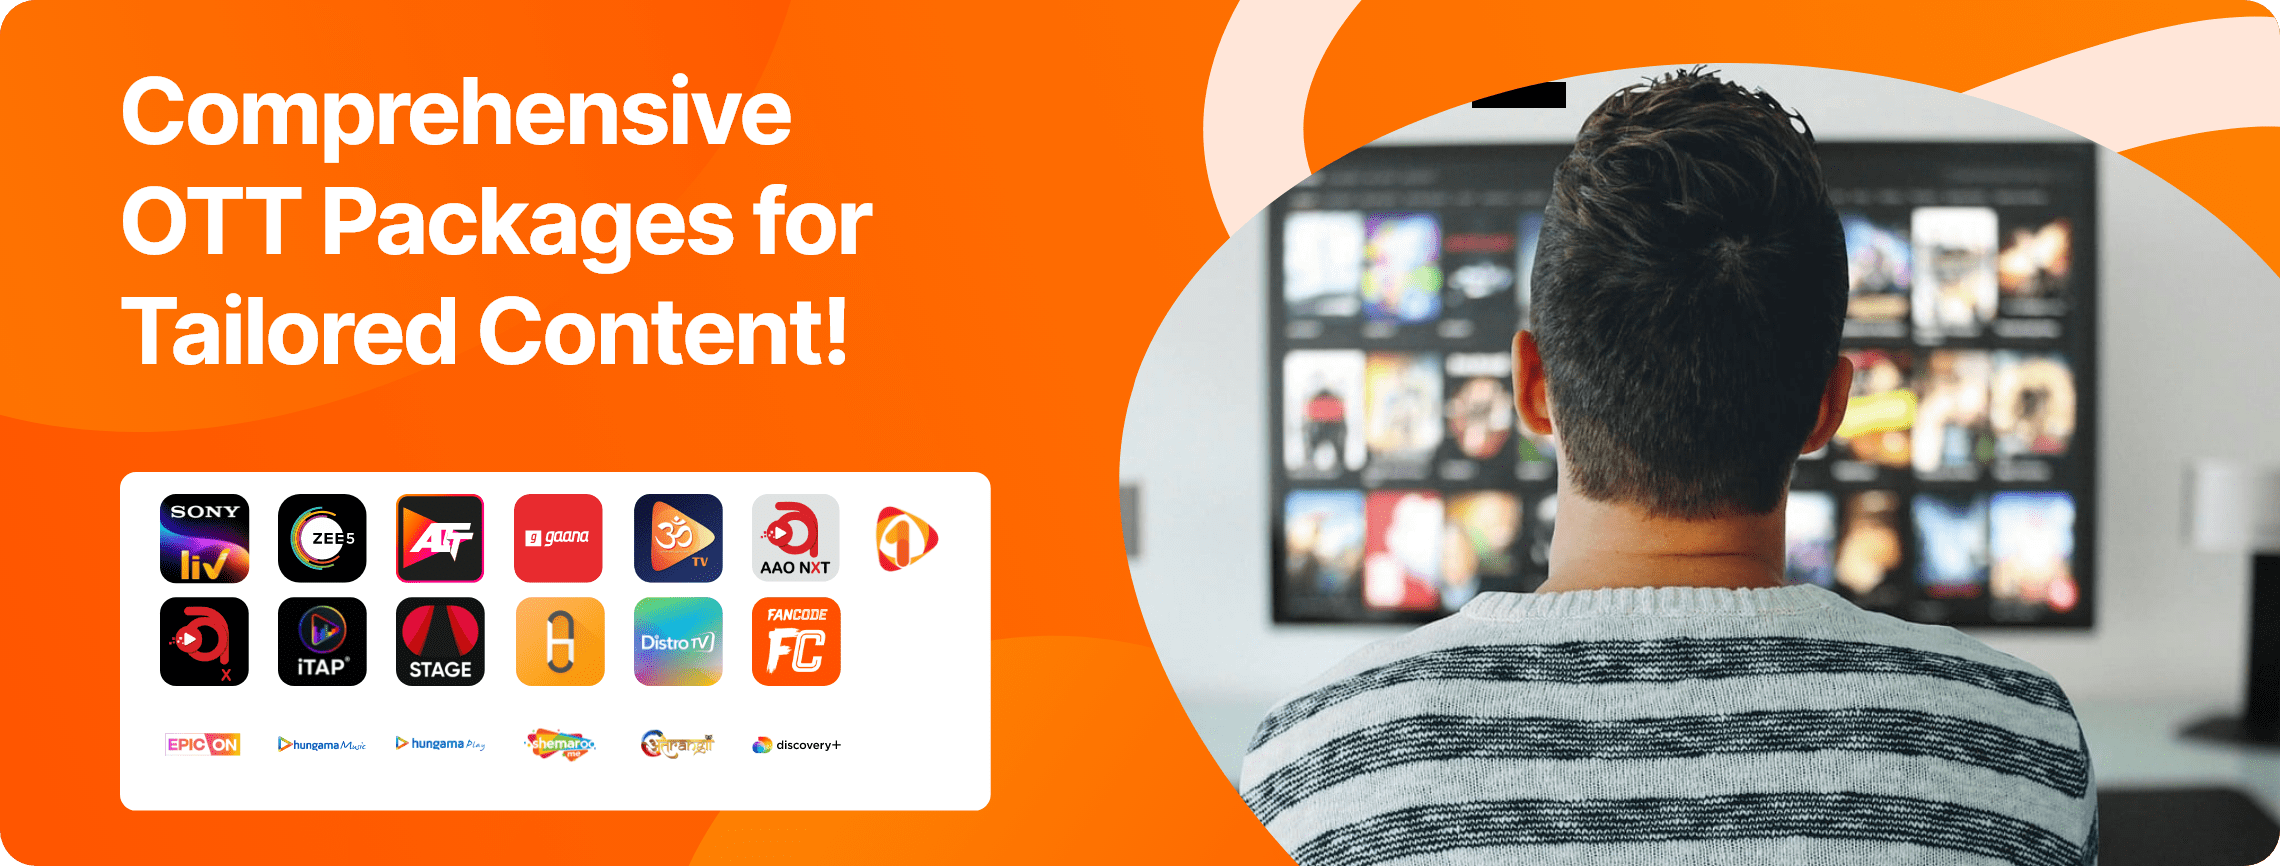 Comprehensive all-in-one OTT subscription packages for tailored content.